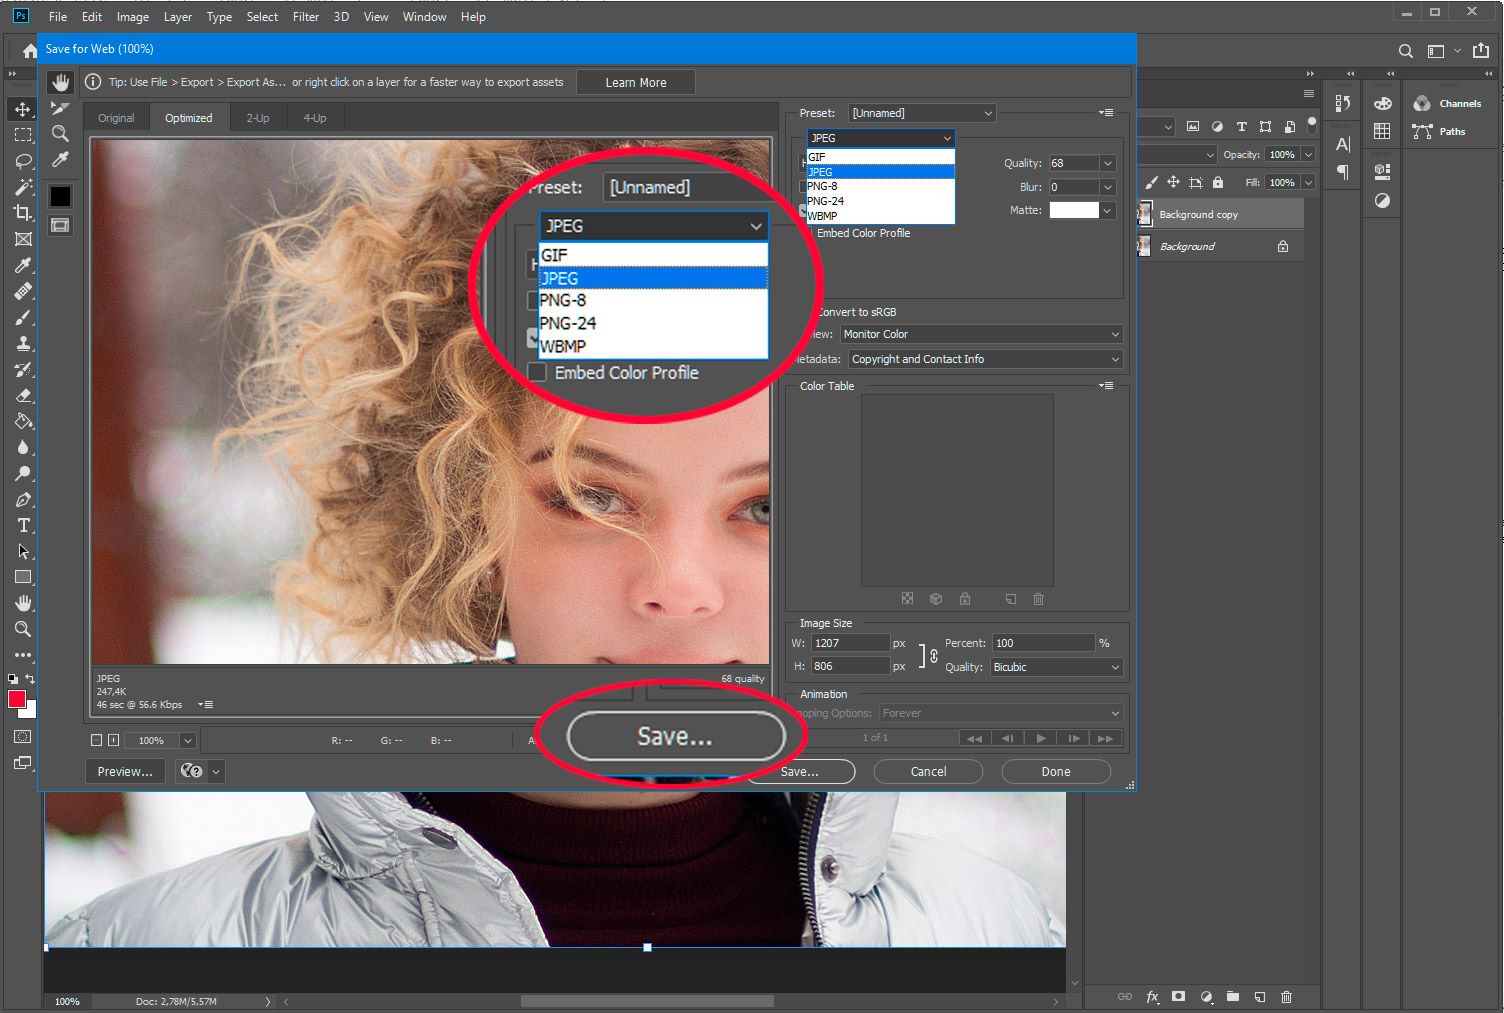 Adobe Photoshop.. save PSD for web in jpg..